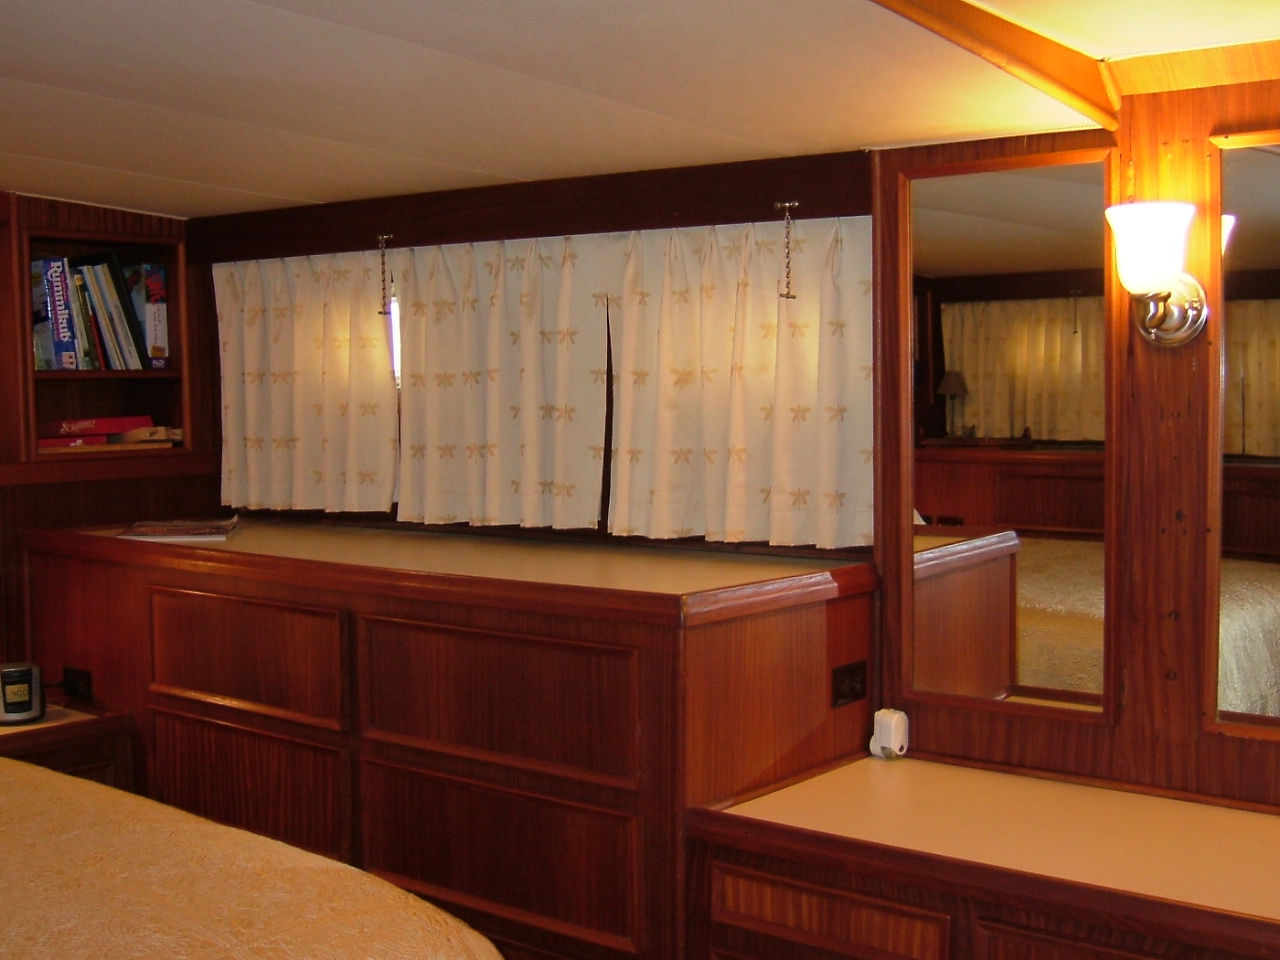 3 Master Stateroom, looking to port